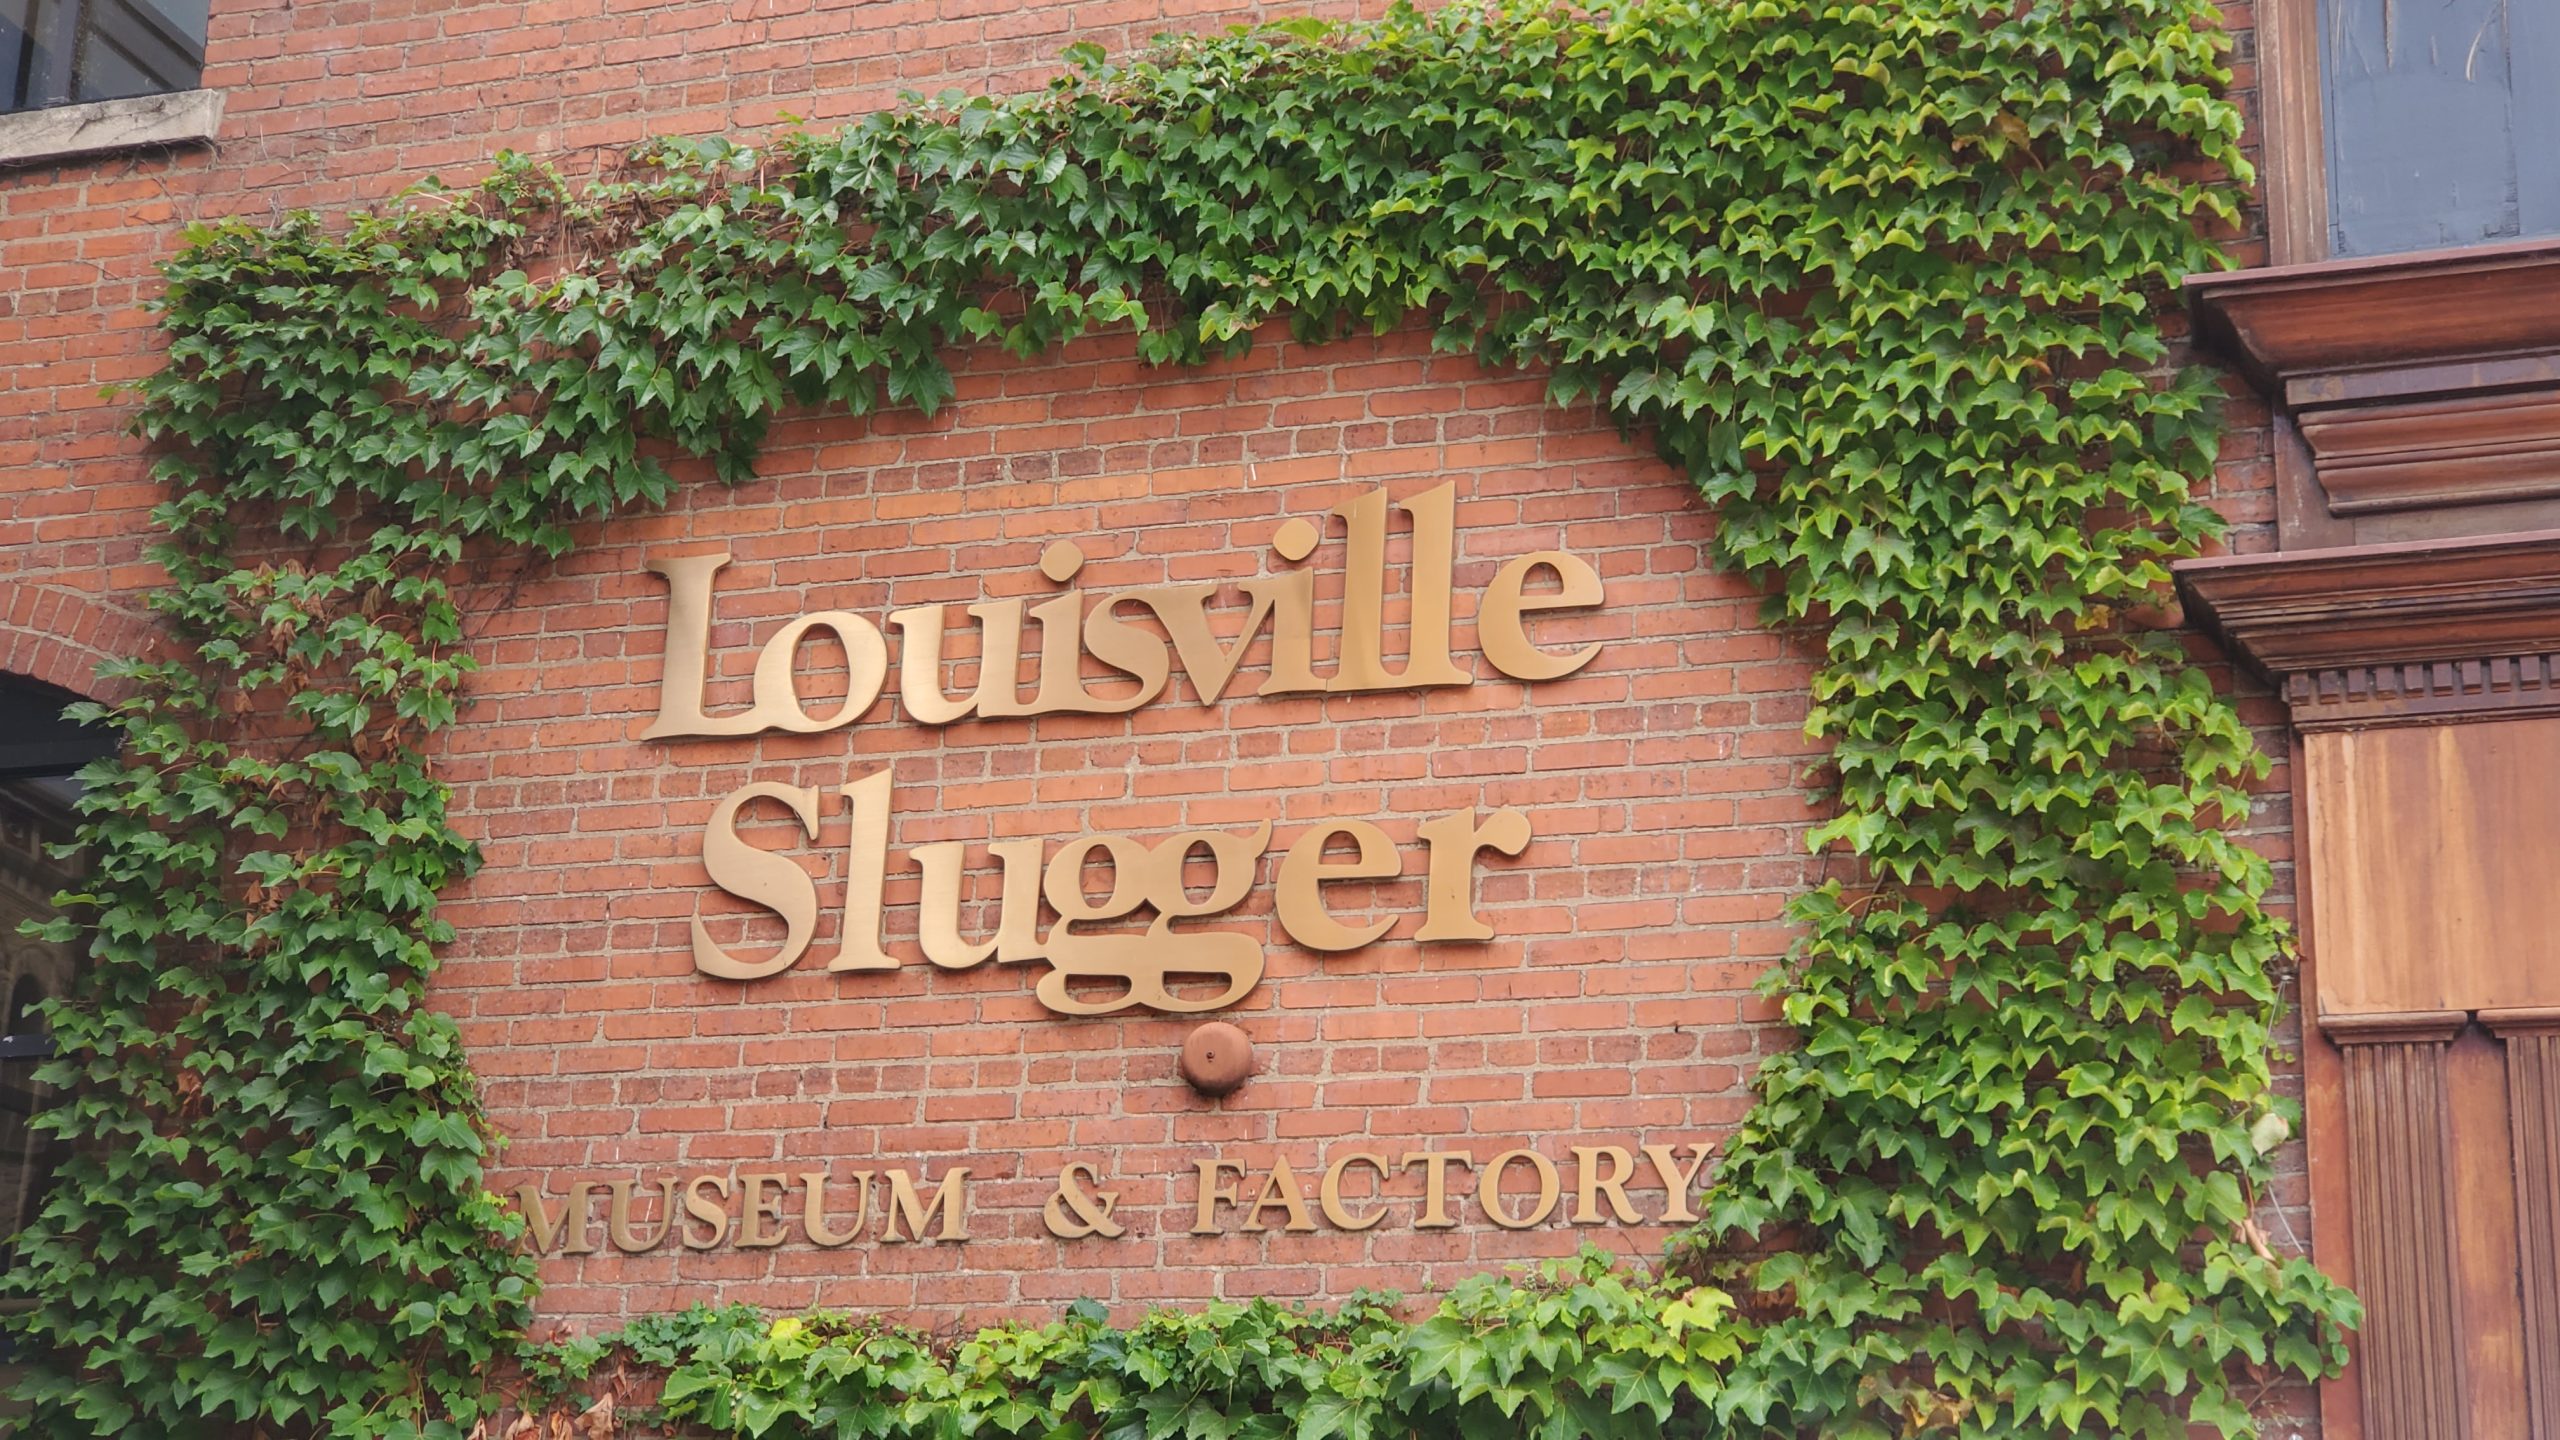 Photograph of the Louisville Slugger Museum and Factory sign.